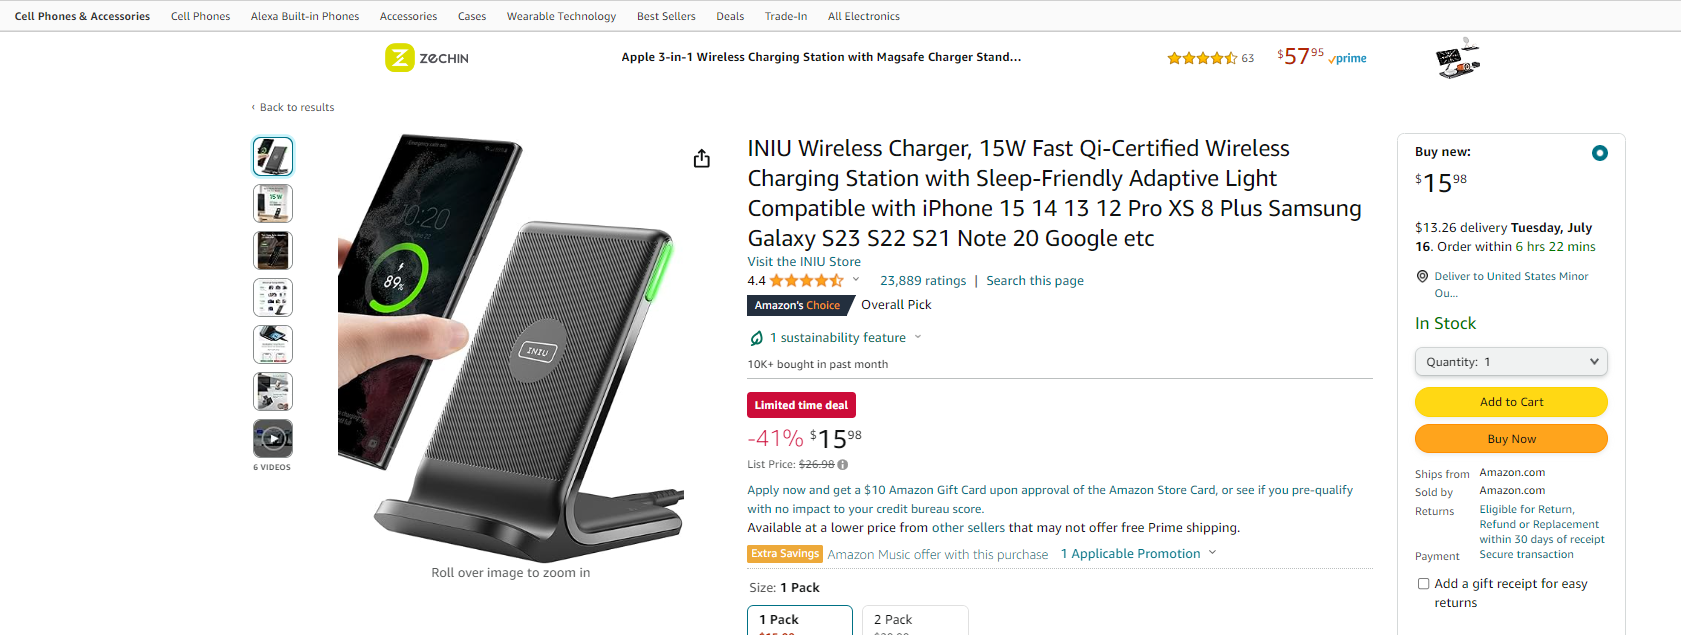 Wireless chargers are an essential product in the consumer electronics market, particularly for those who value convenience and a clutter-free charging experience.